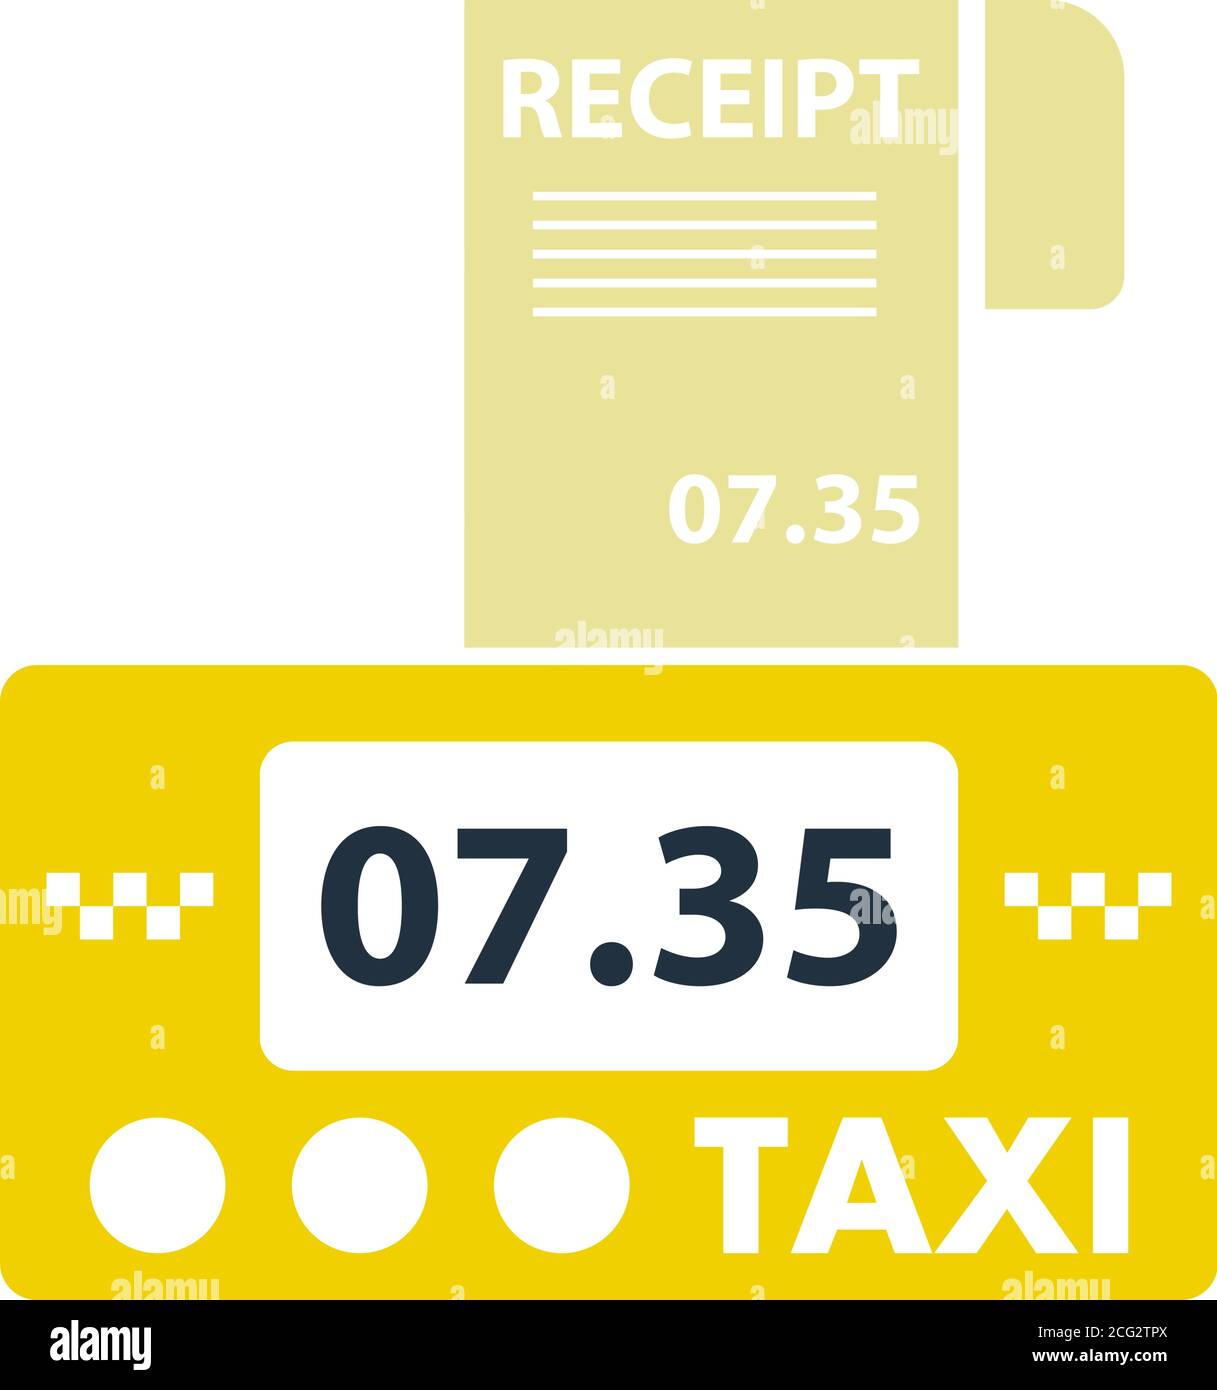 Taxi Meter With Receipt Icon. Flat Color Design. Vector Illustration. Stock Vector